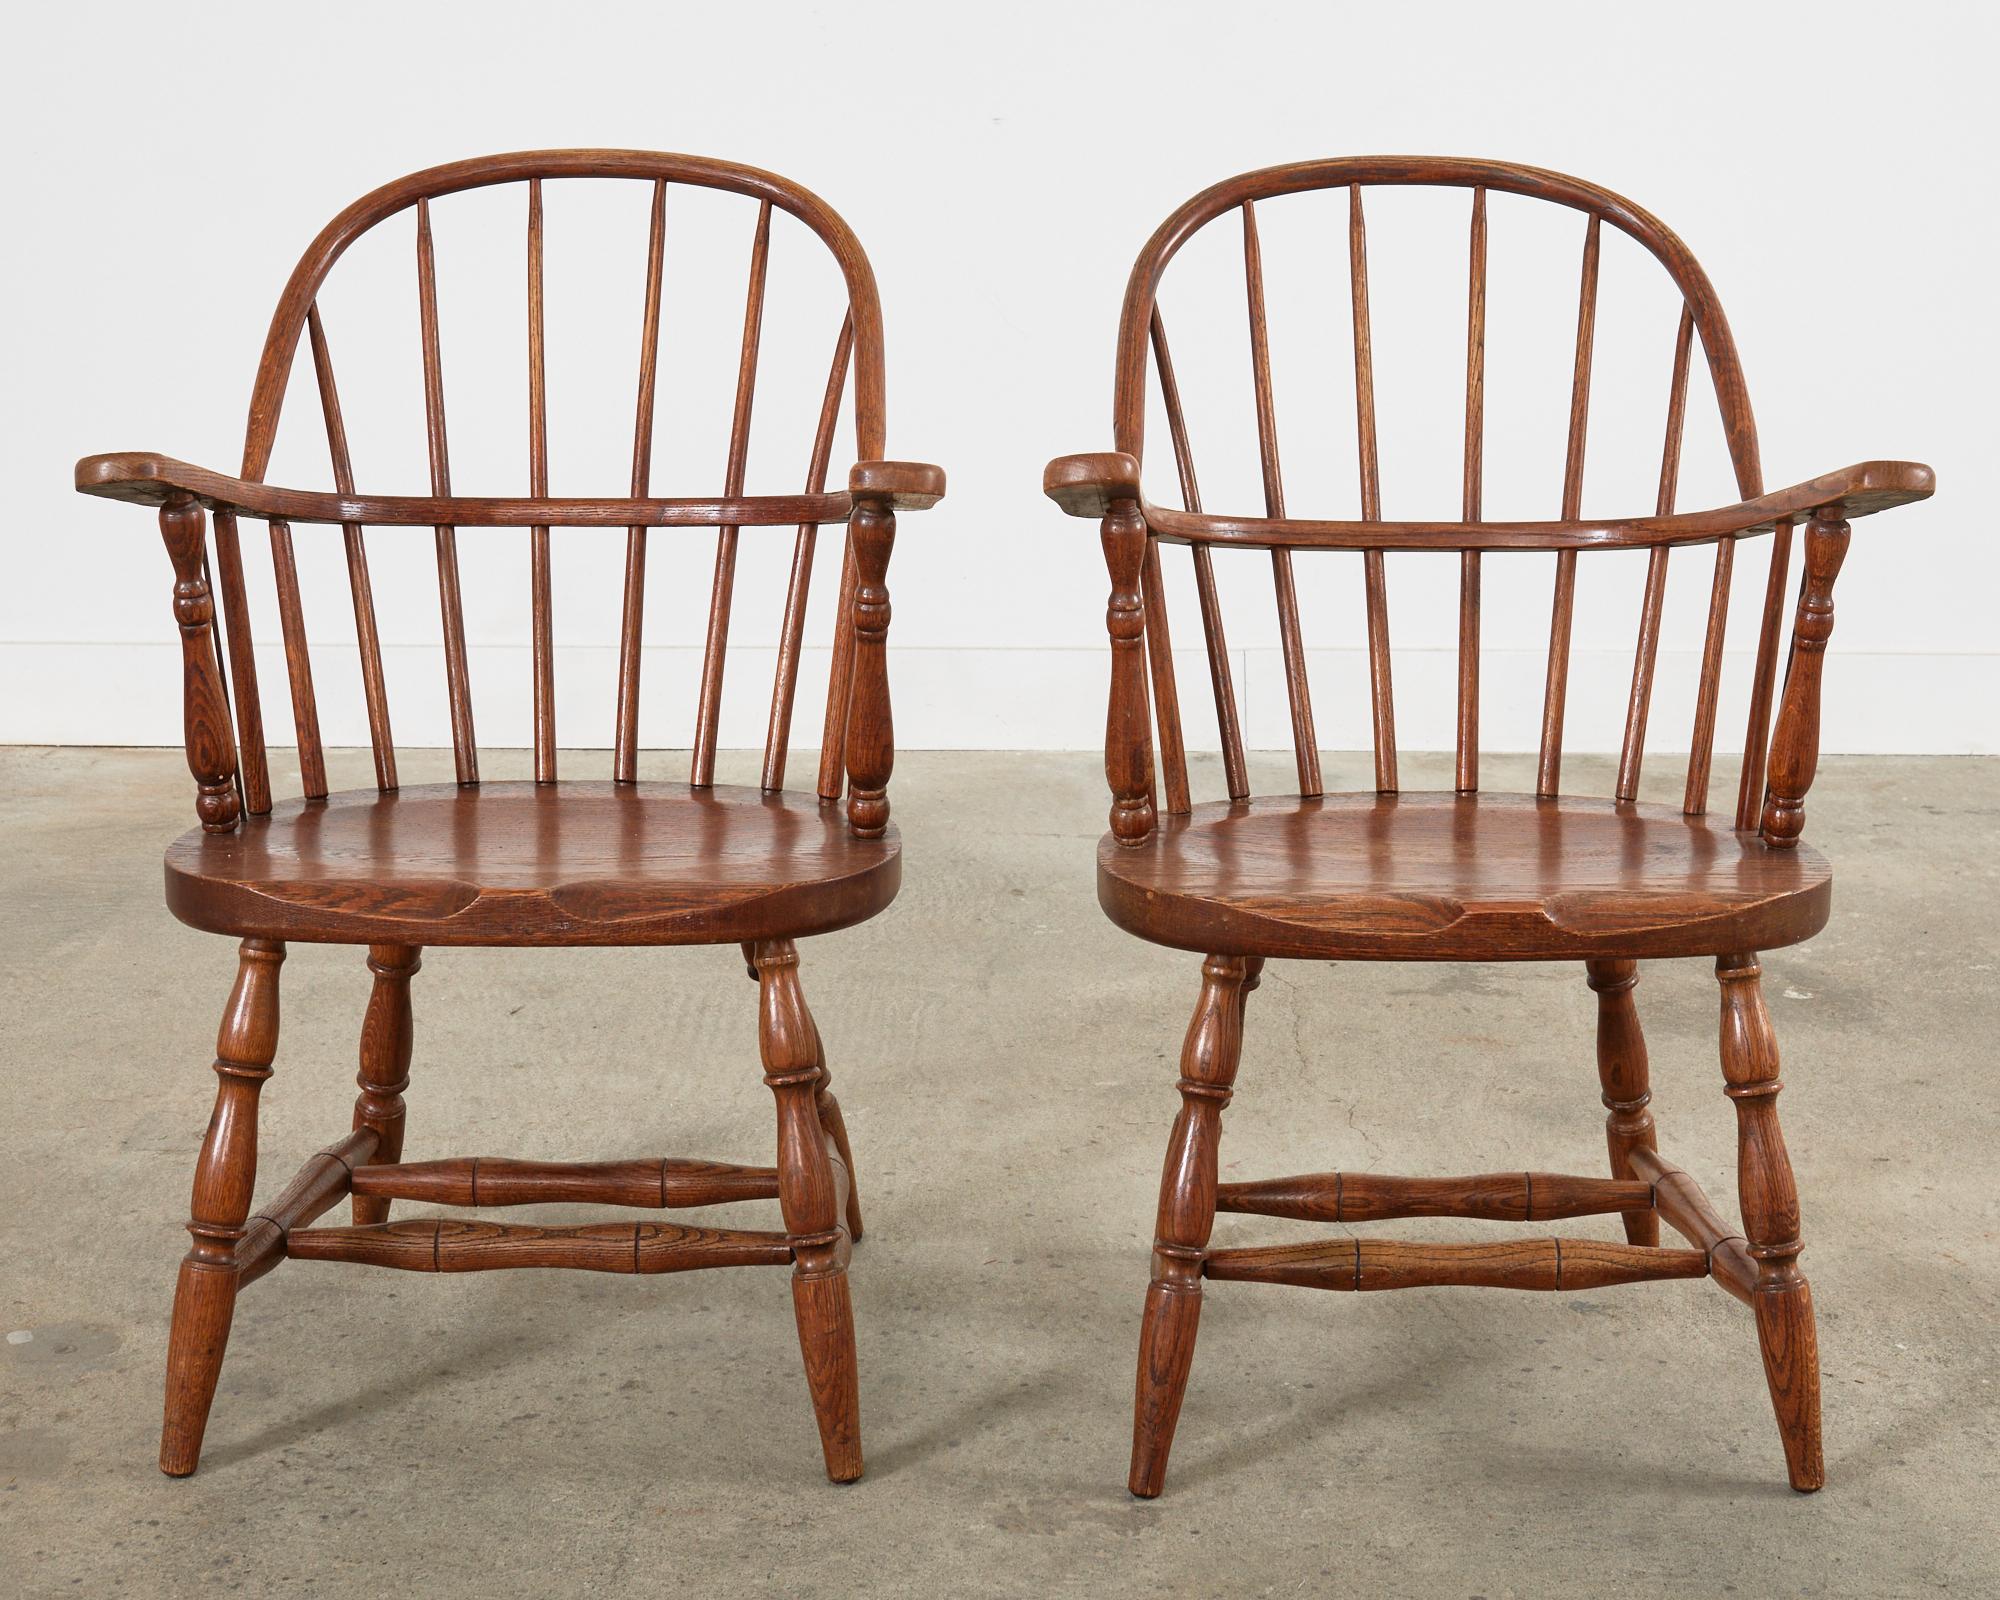 Hand-Crafted Set of Four Country English Oak Hoop Back Windsor Armchairs